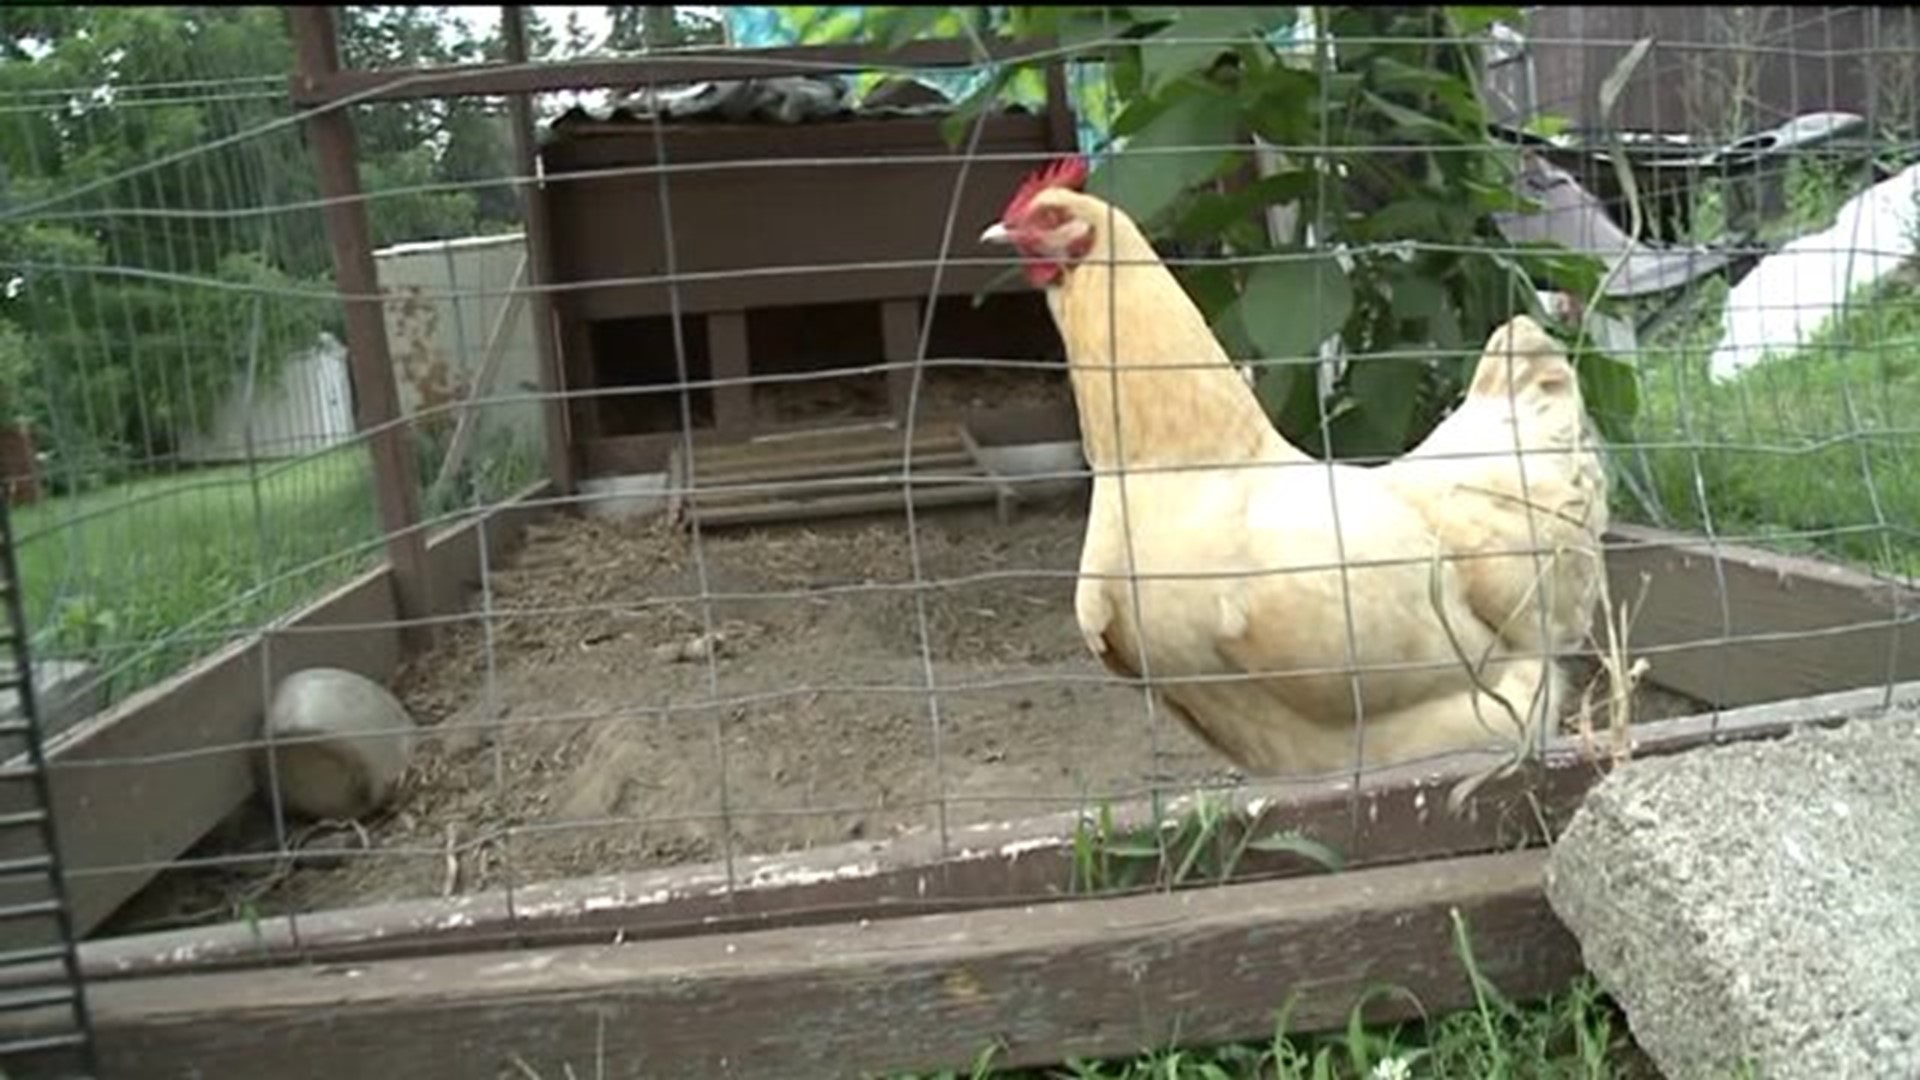 Battle Over Backyard Chickens In Luzerne County